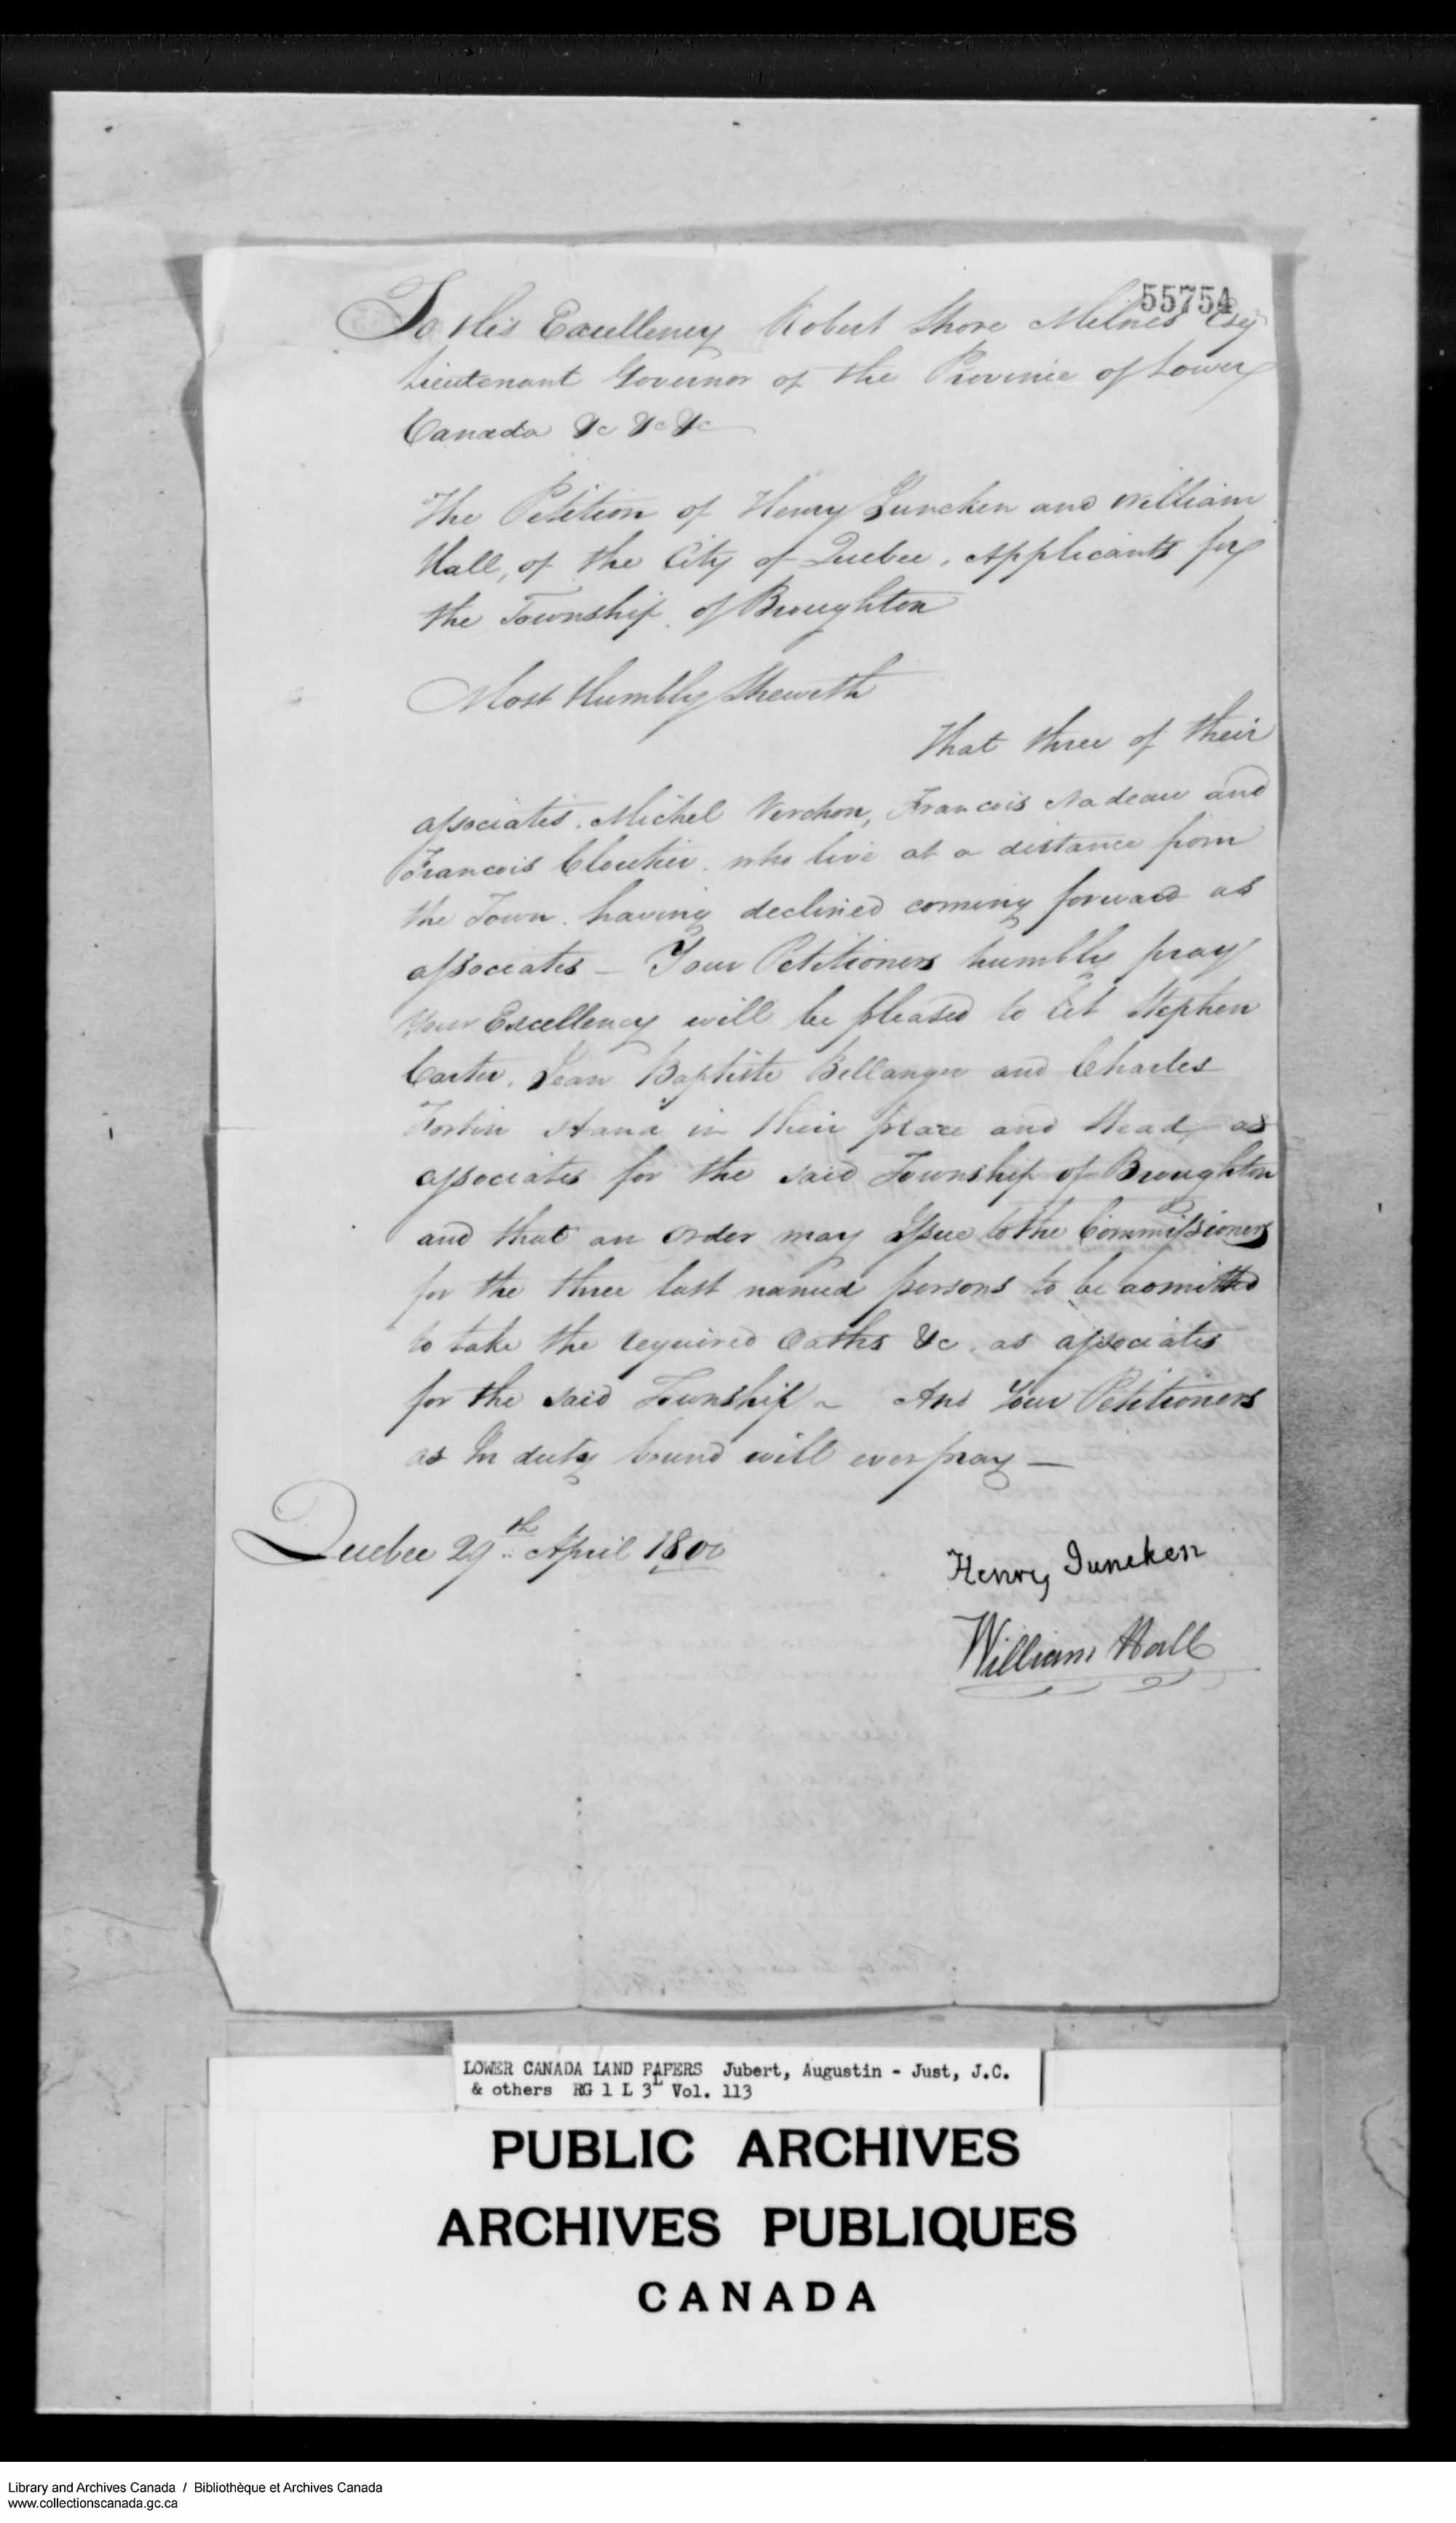 Digitized page of  for Image No.: e008700242